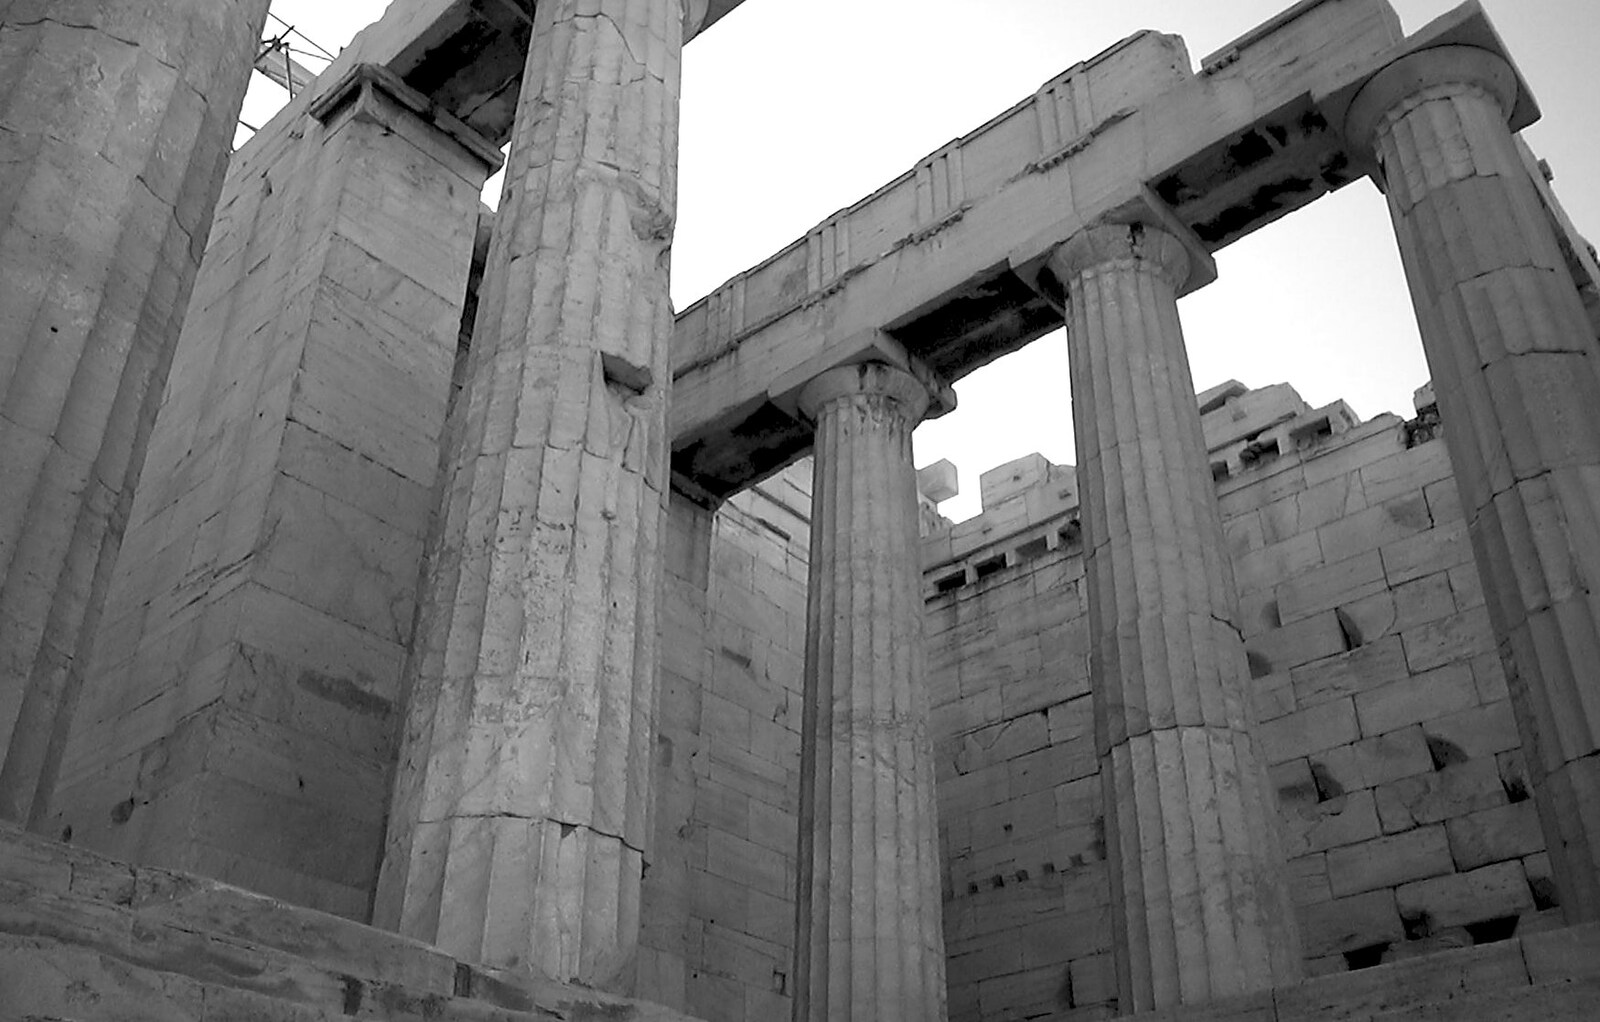 A Postcard From Athens: A Day Trip to the Olympics, Greece - 19th August 2004: The Propylaia - entrance temple to the Acropolis